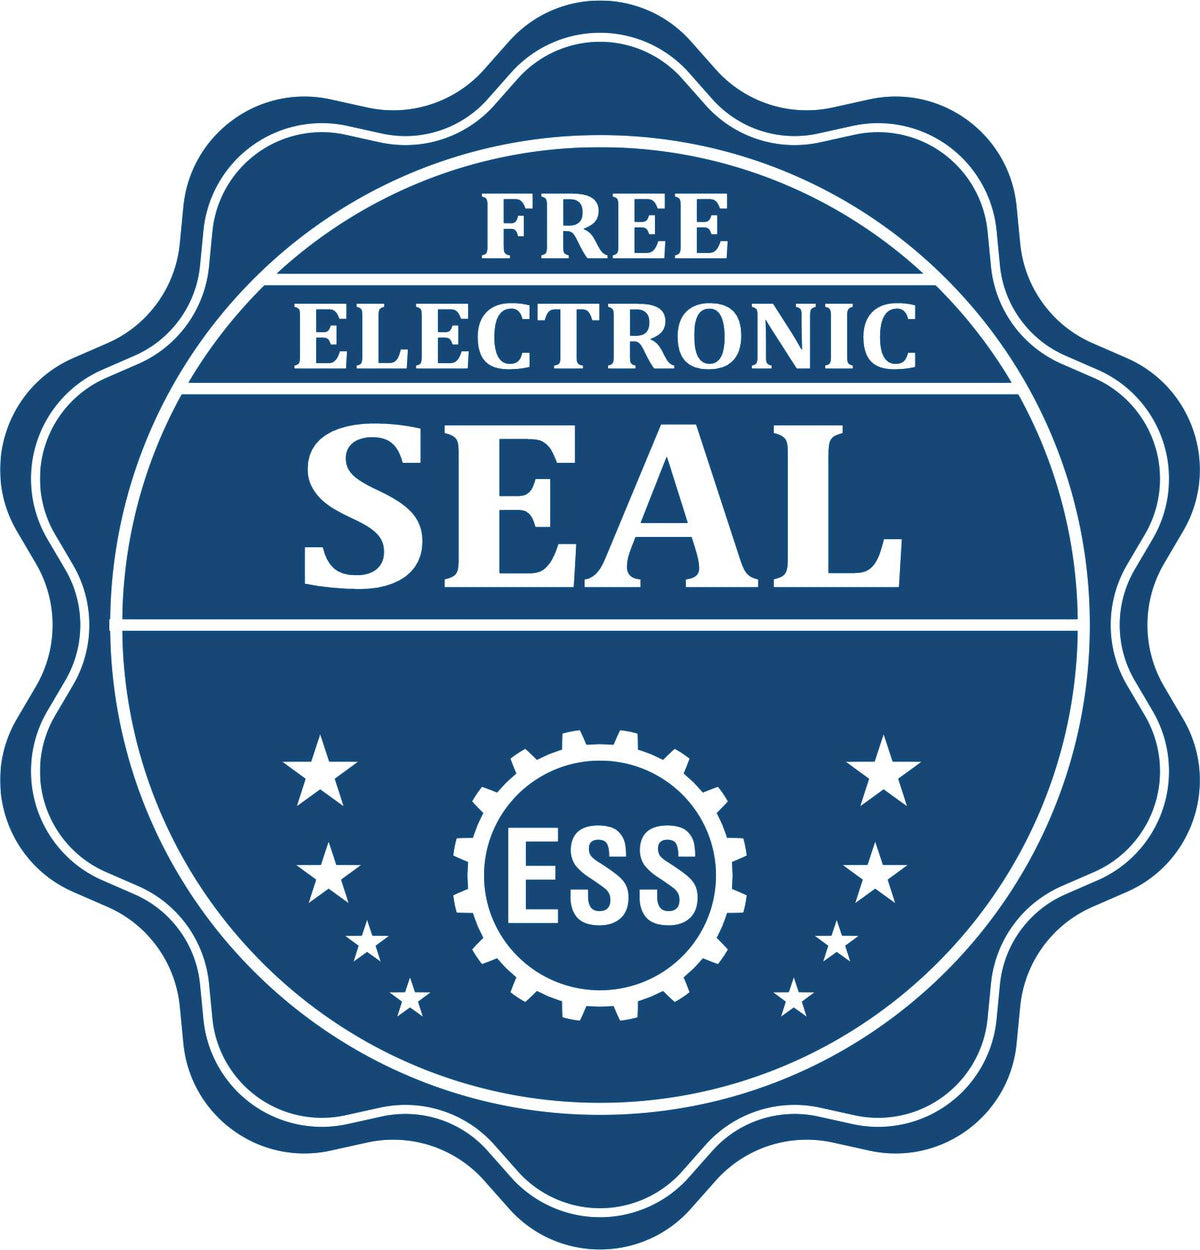 A badge showing a free electronic seal for the Handheld Texas Professional Geologist Embosser with stars and the ESS gear on the emblem.